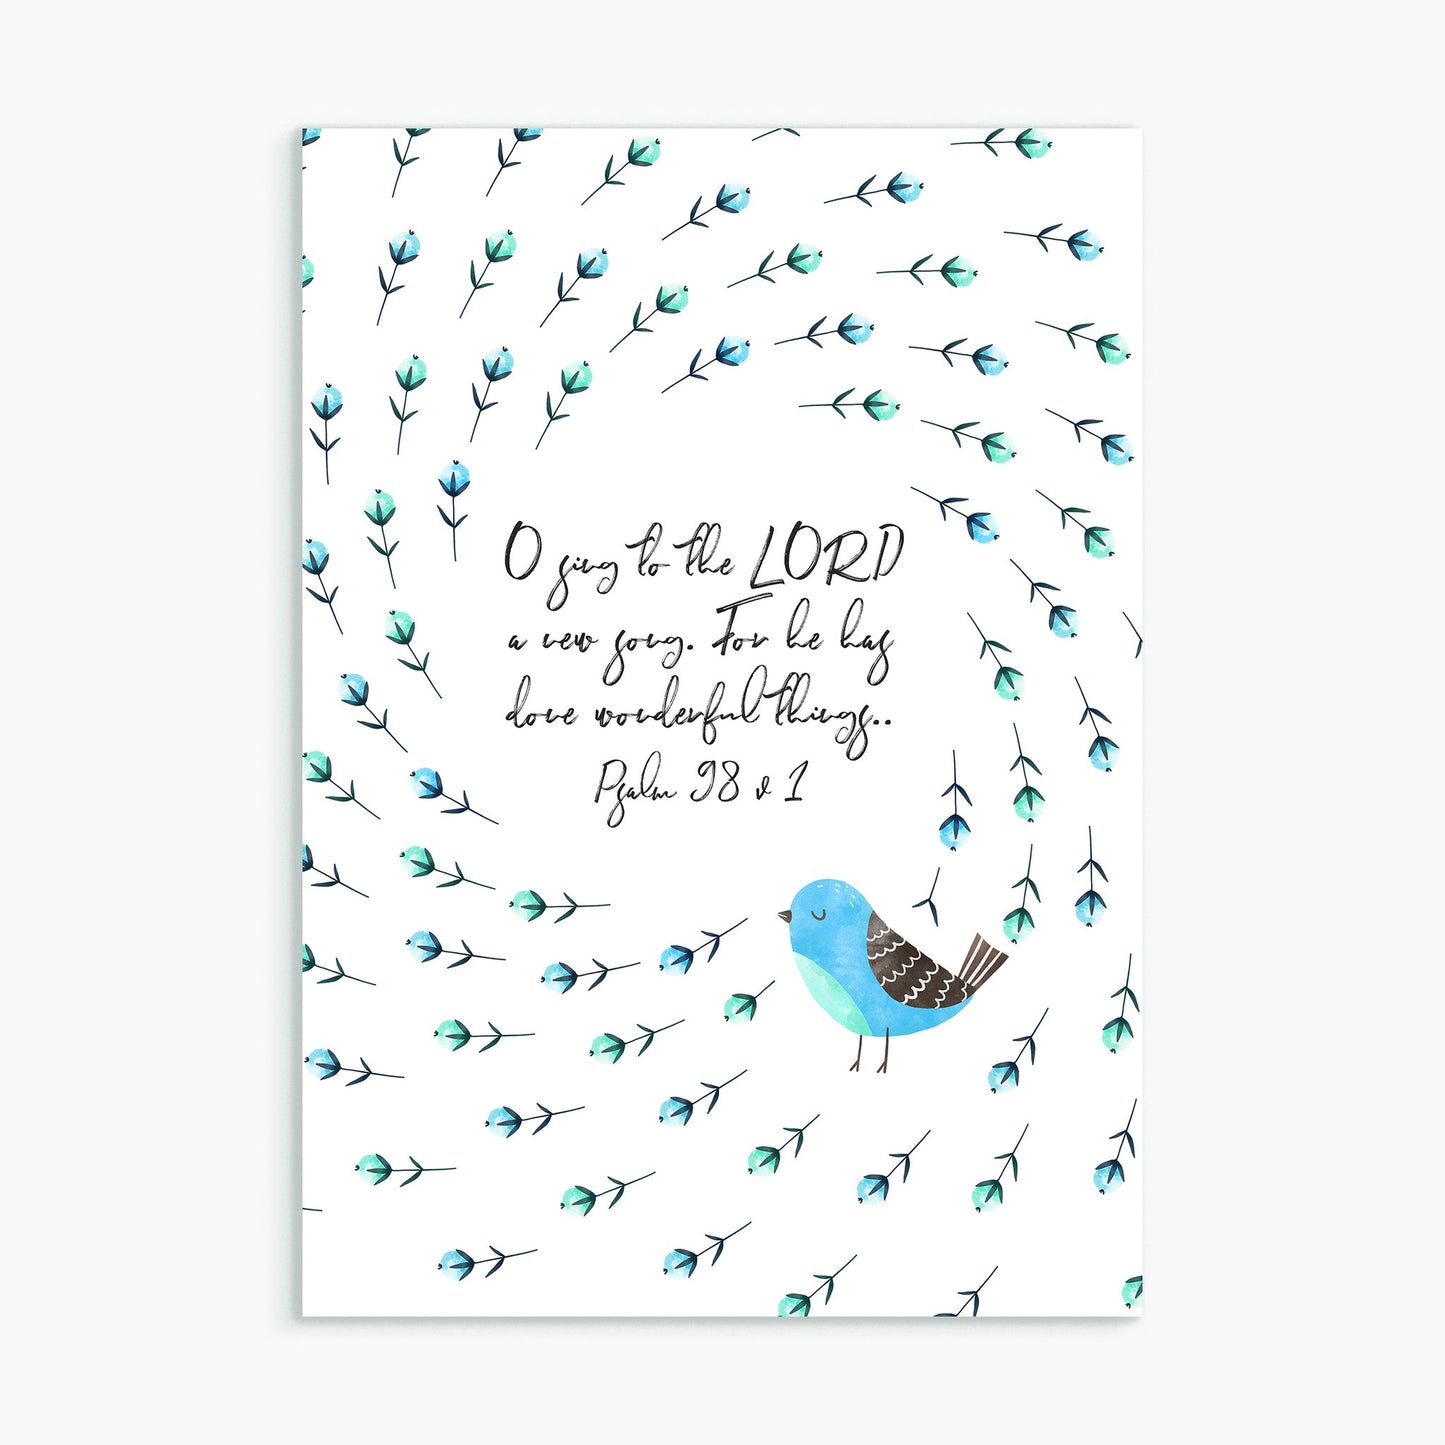 'O Sing To The Lord' print